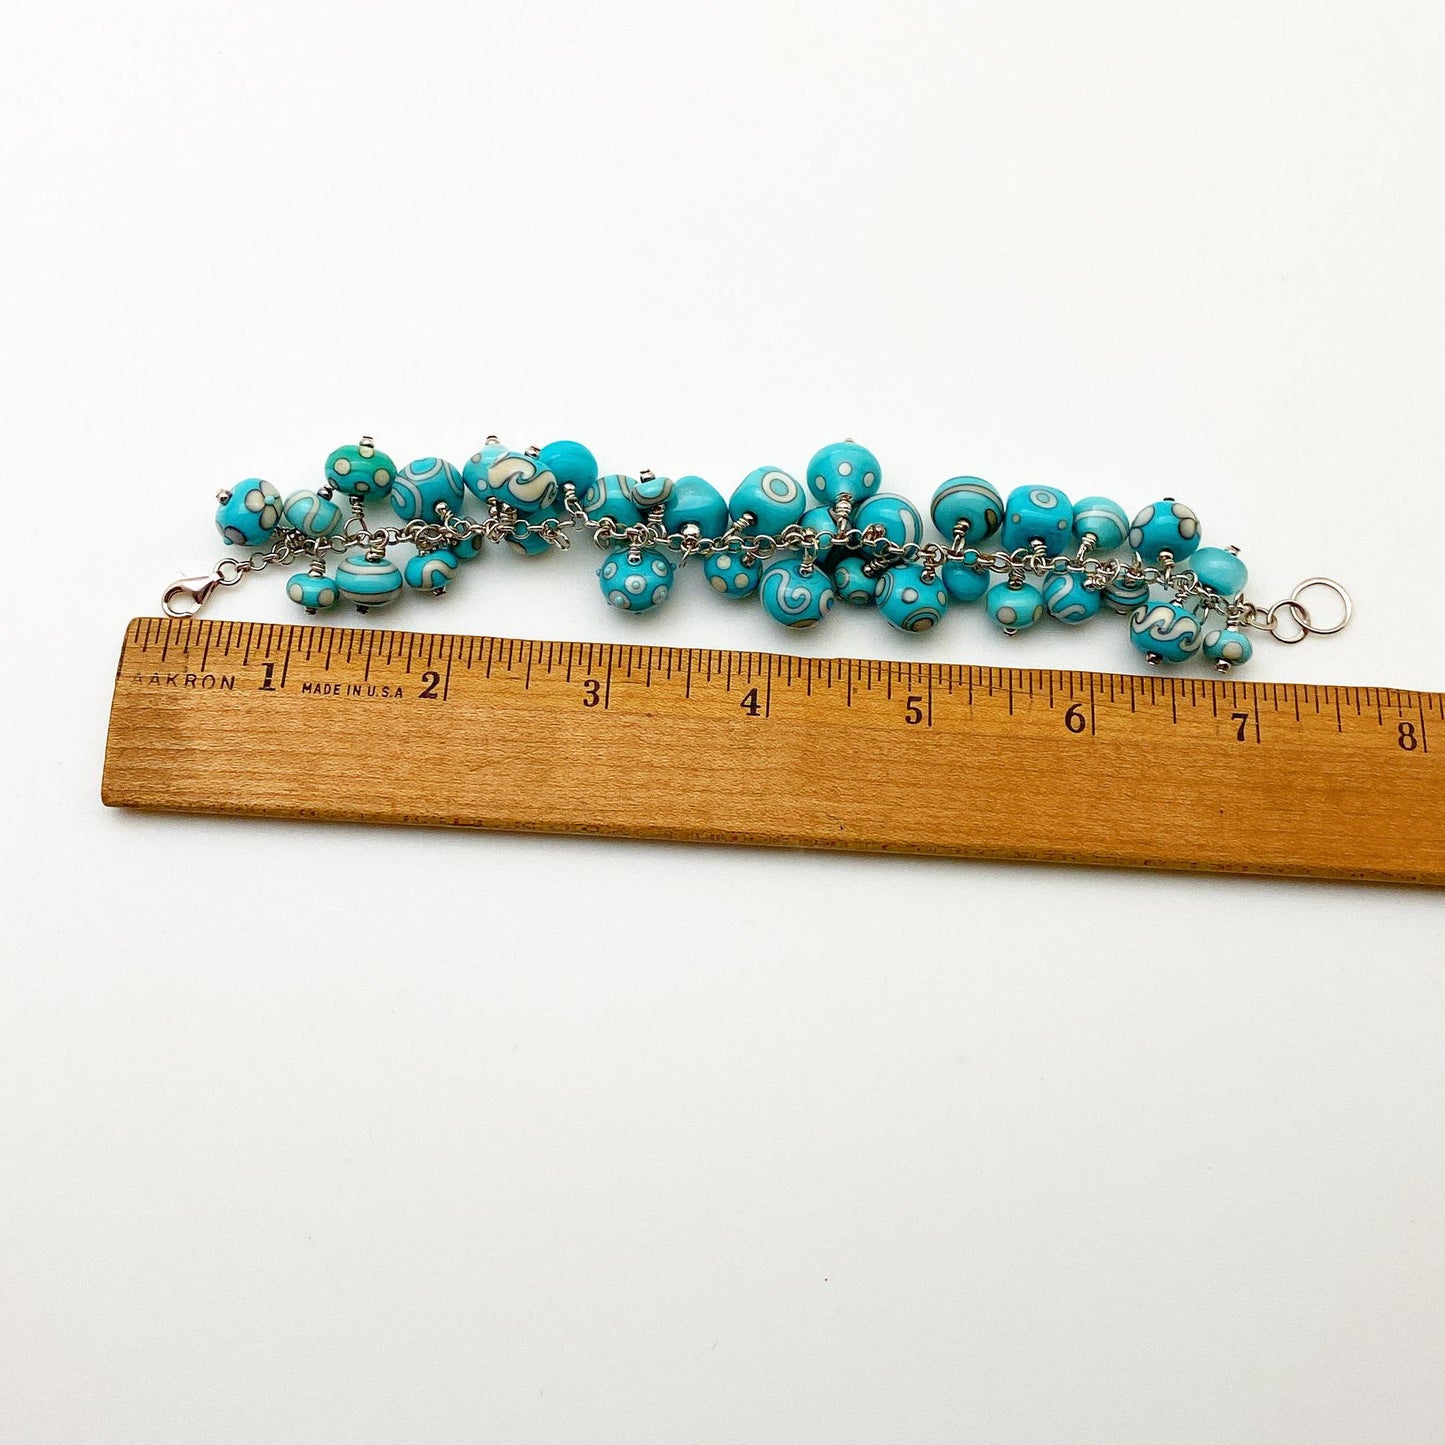 Bracelet - Turquoise and White Charms - Handmade Glass